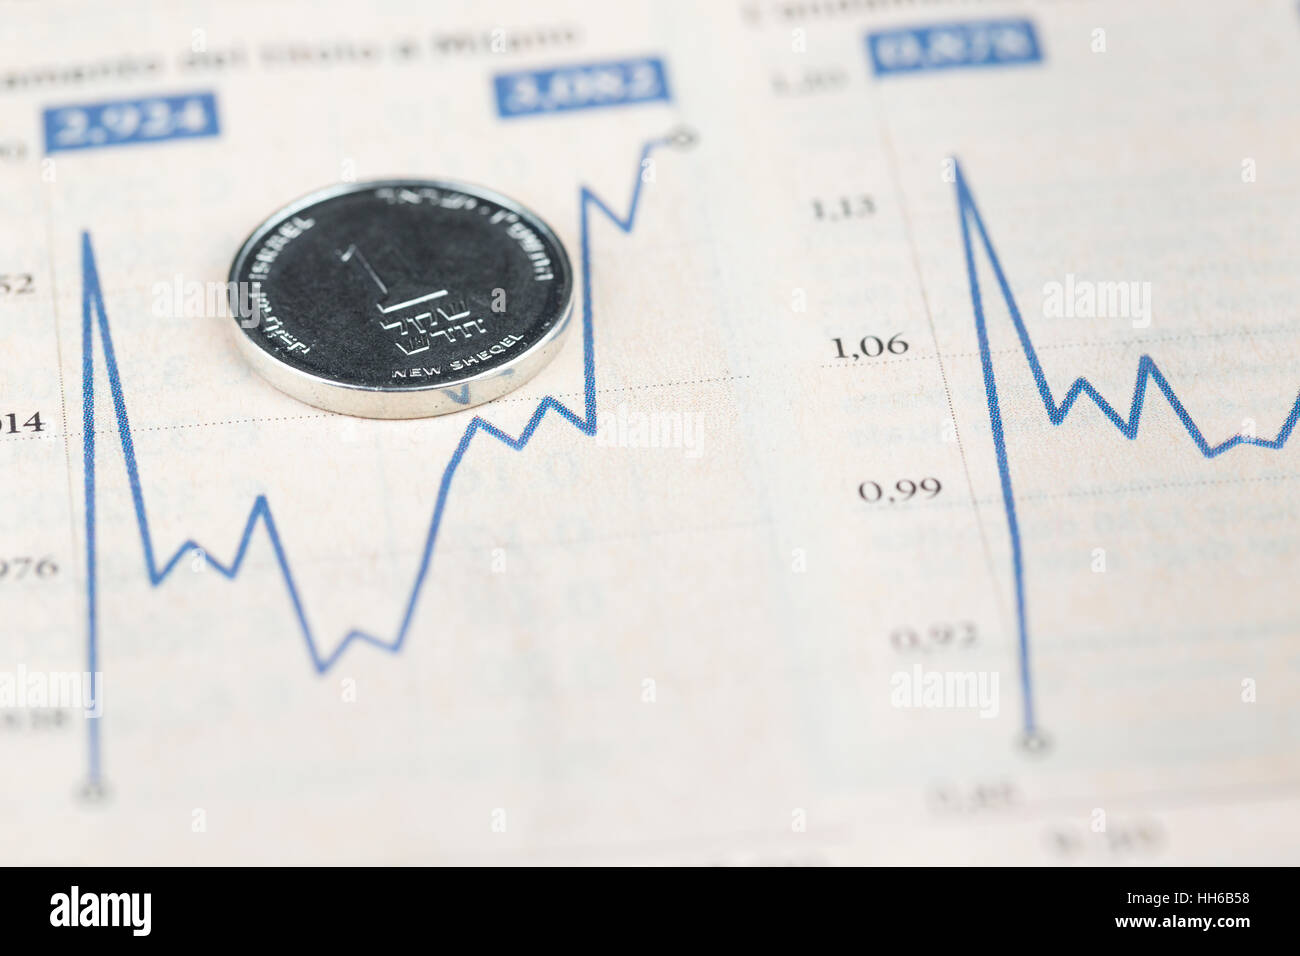 One israeli shekel coin over financial graph, economy concept Stock Photo